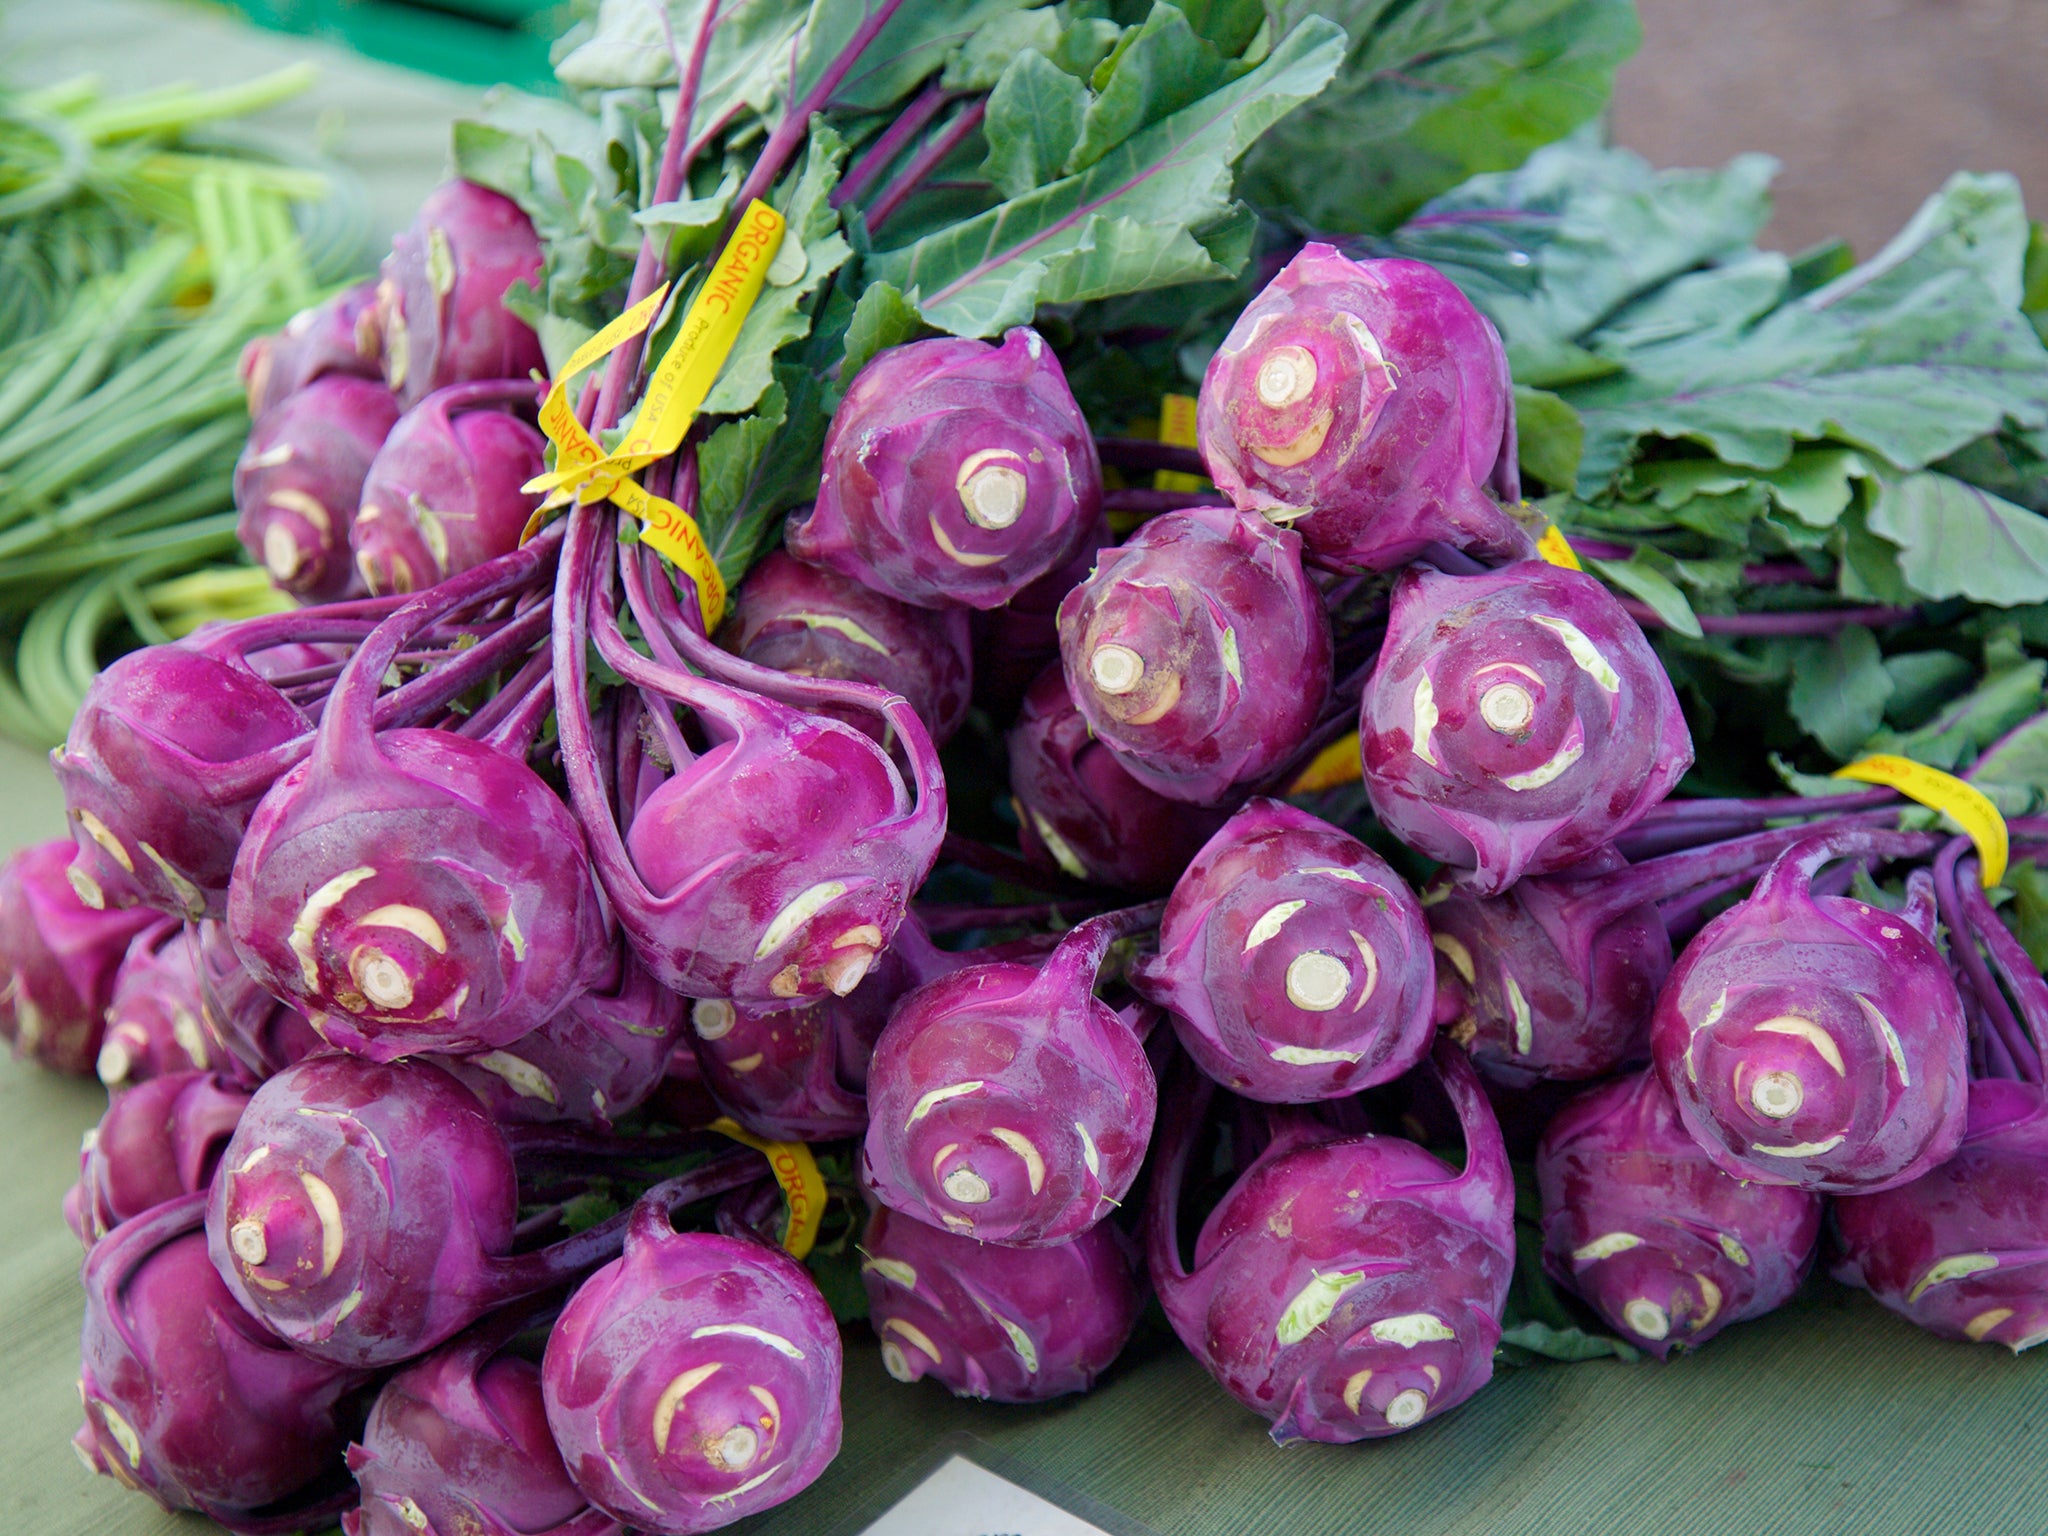 The purple kohlrabi is slightly less common than its pale green cousin